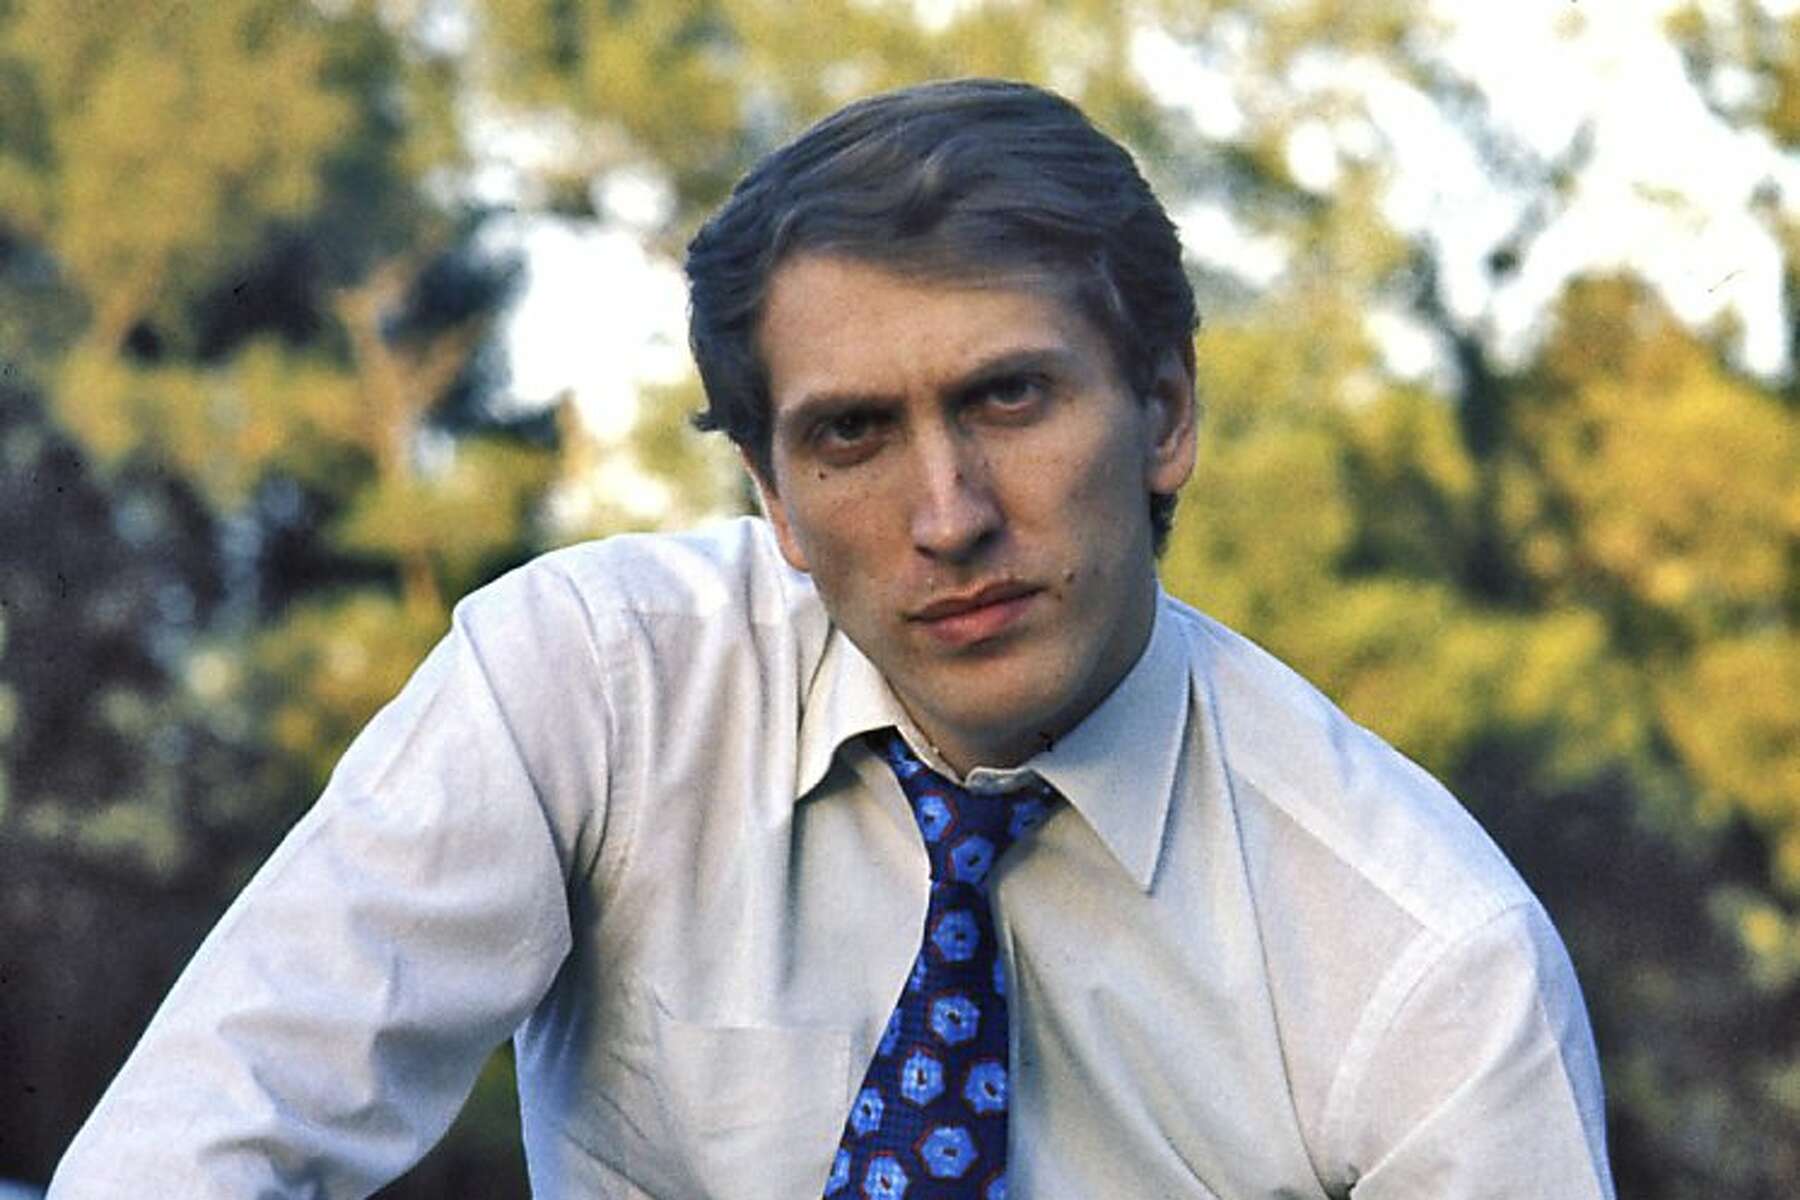 Bobby Fischer Against the World,' Documentary - Review - The New York Times